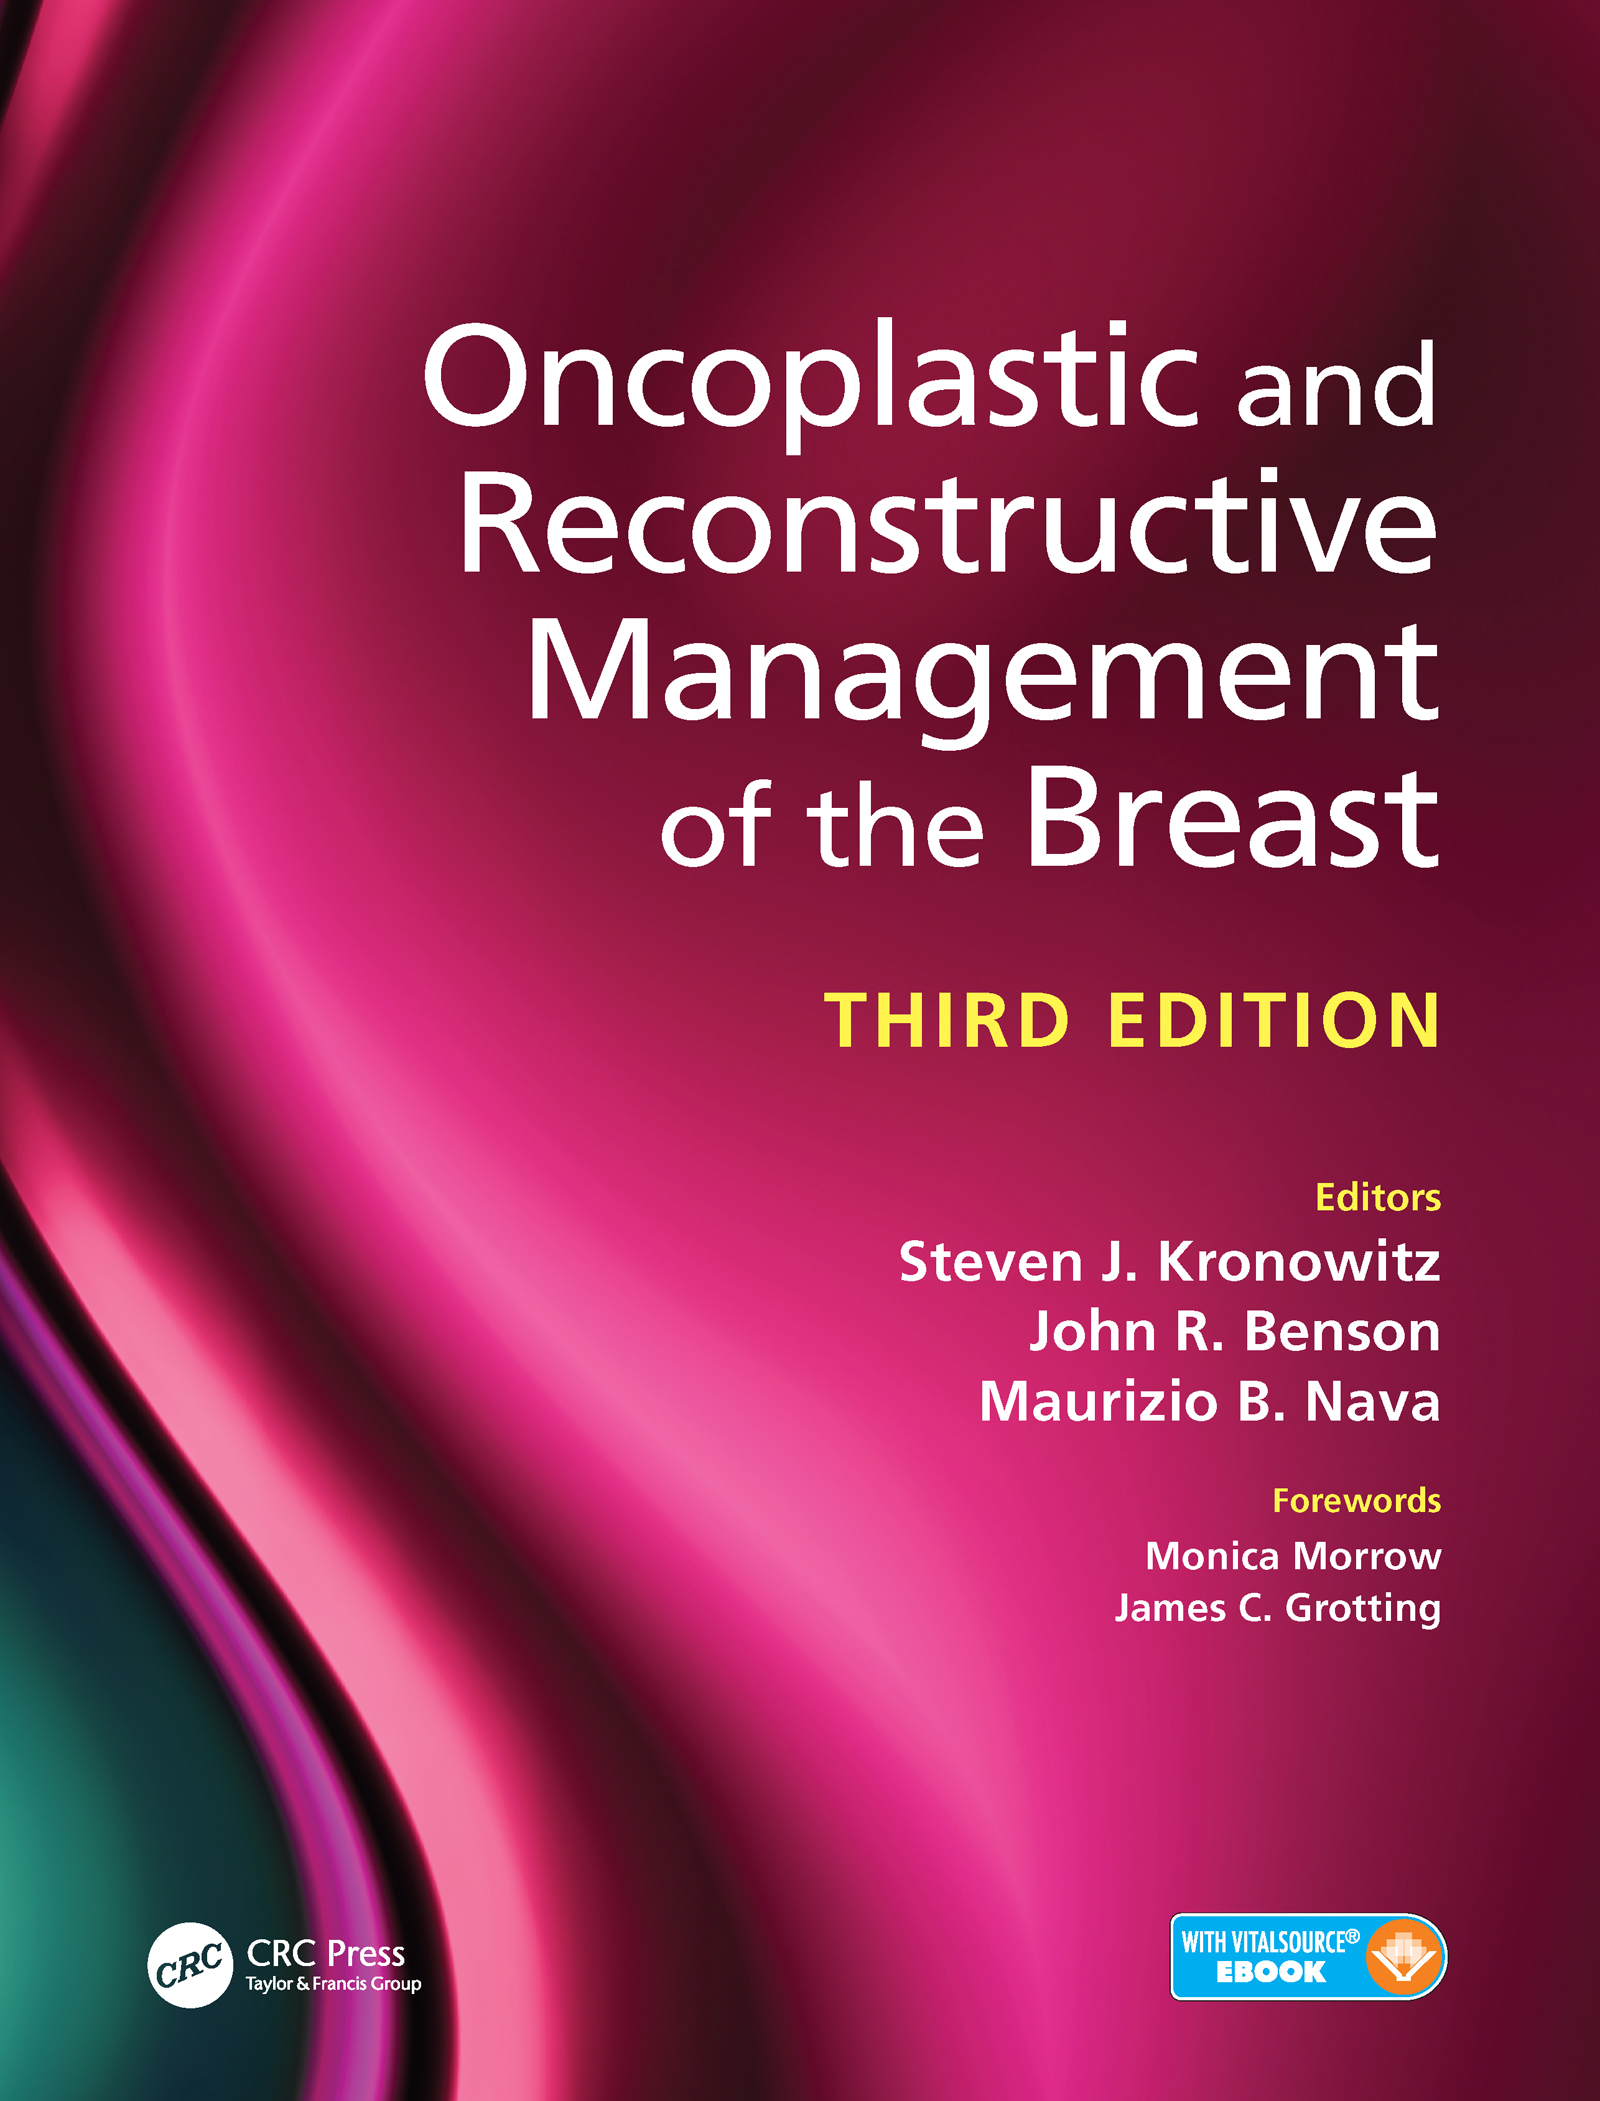 Oncoplastic & Reconstructive Management of Breast,3rd ed.